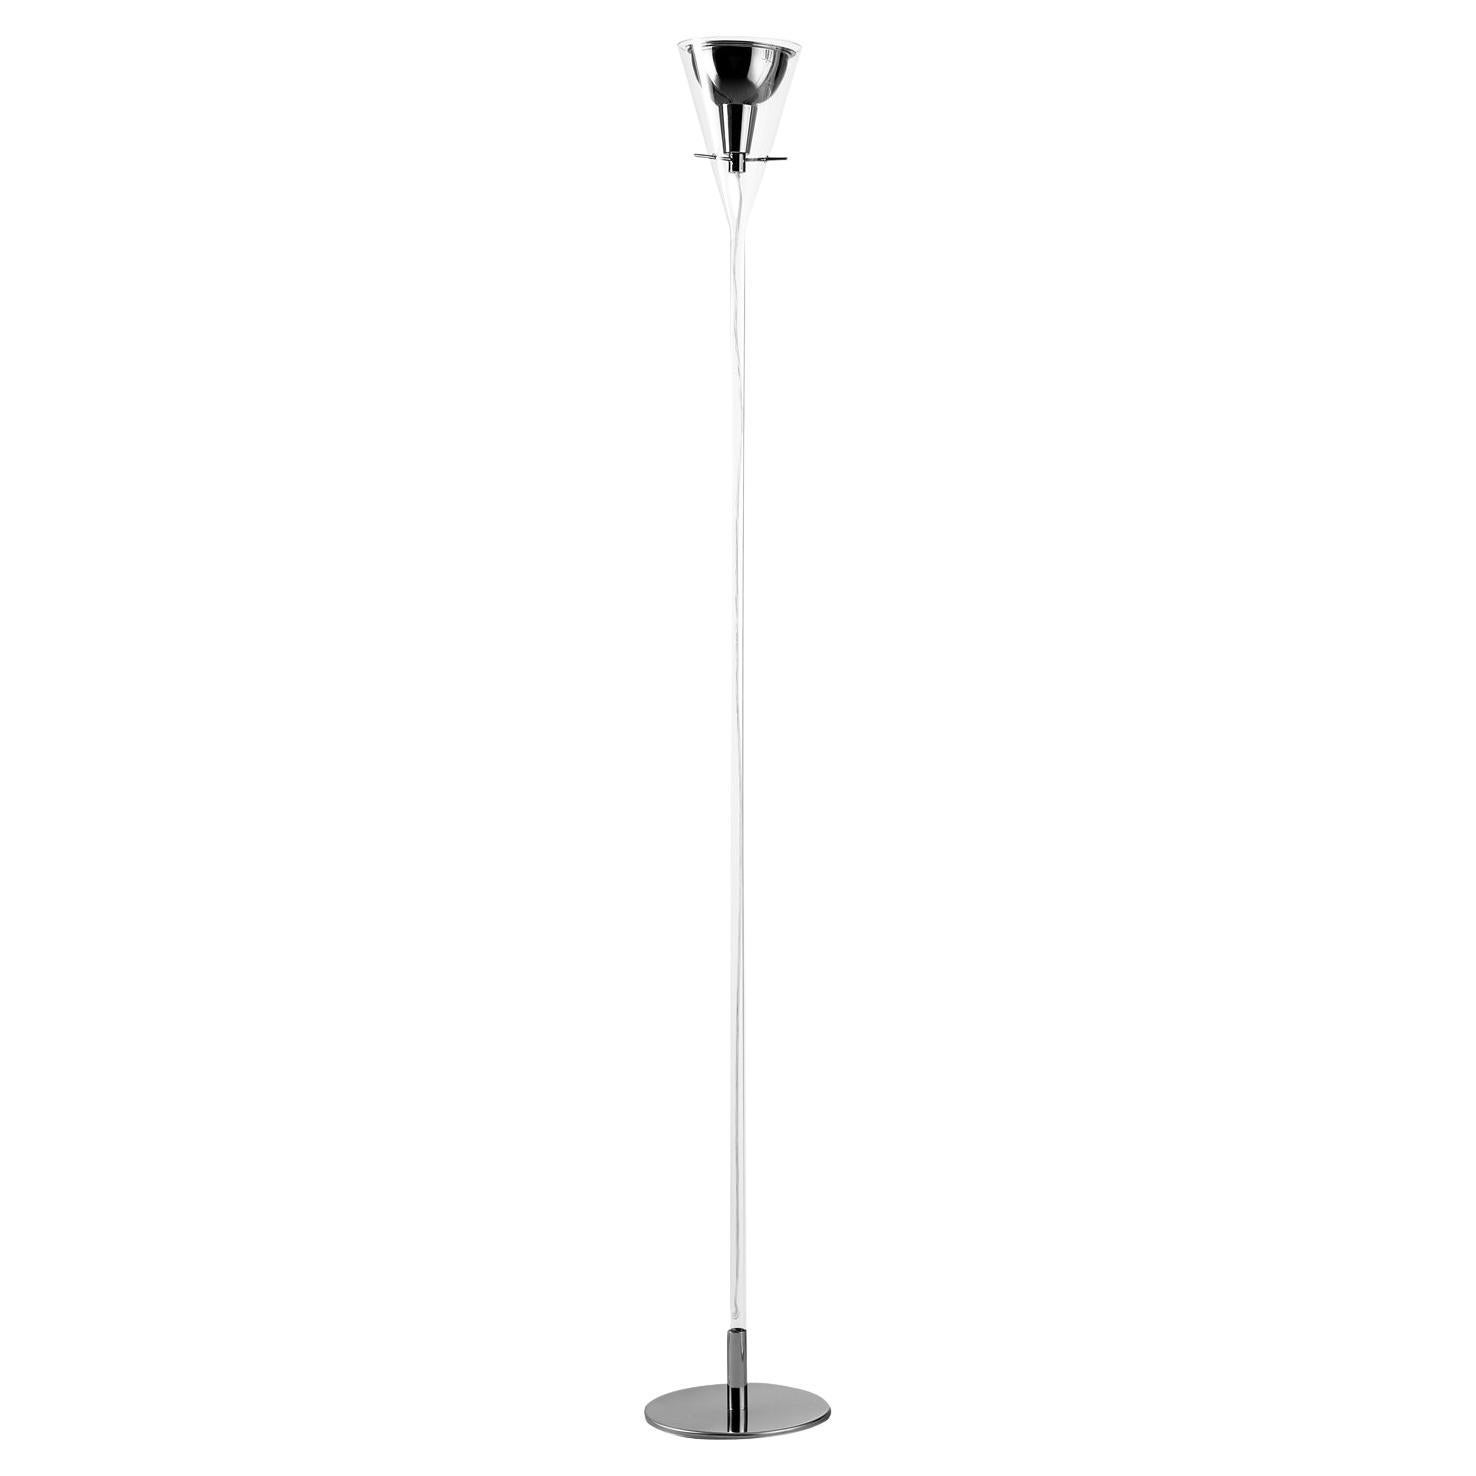 Designed by Franco Raggi and manufactured by Fontana Arte, the flute floor lamp designed in 1999 is made from a glass cone that holds the chromed aluminium reflector, supported by three slender metal rods. Equilibrium and lightness for this family